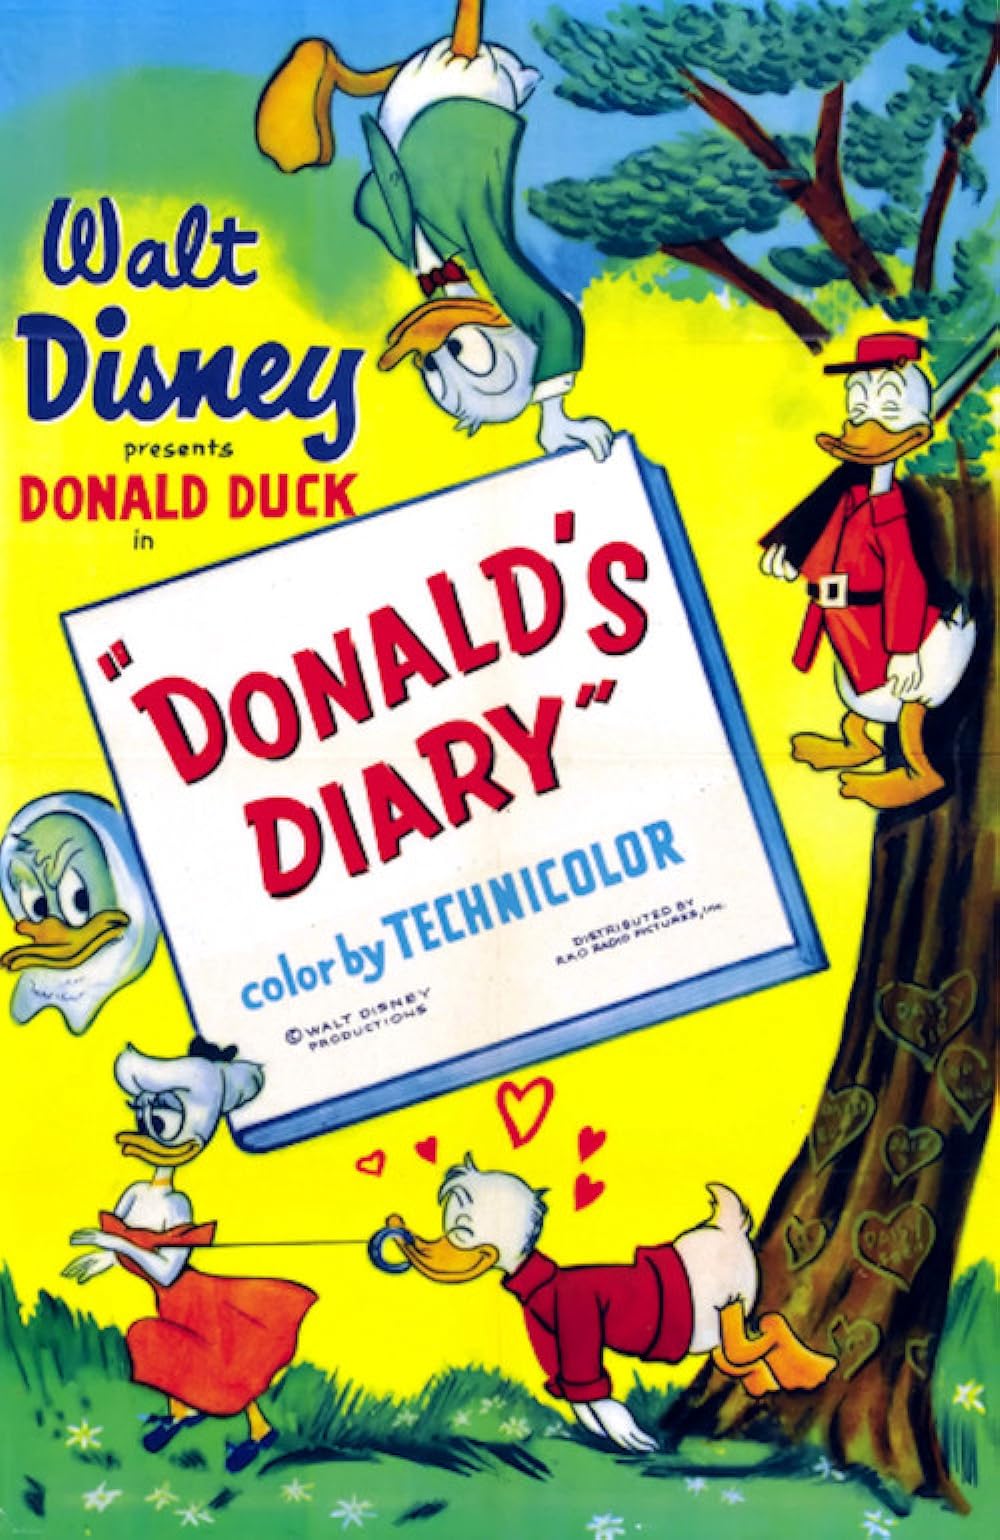 chase robbins recommends Donald Duck Getting A Blow Job